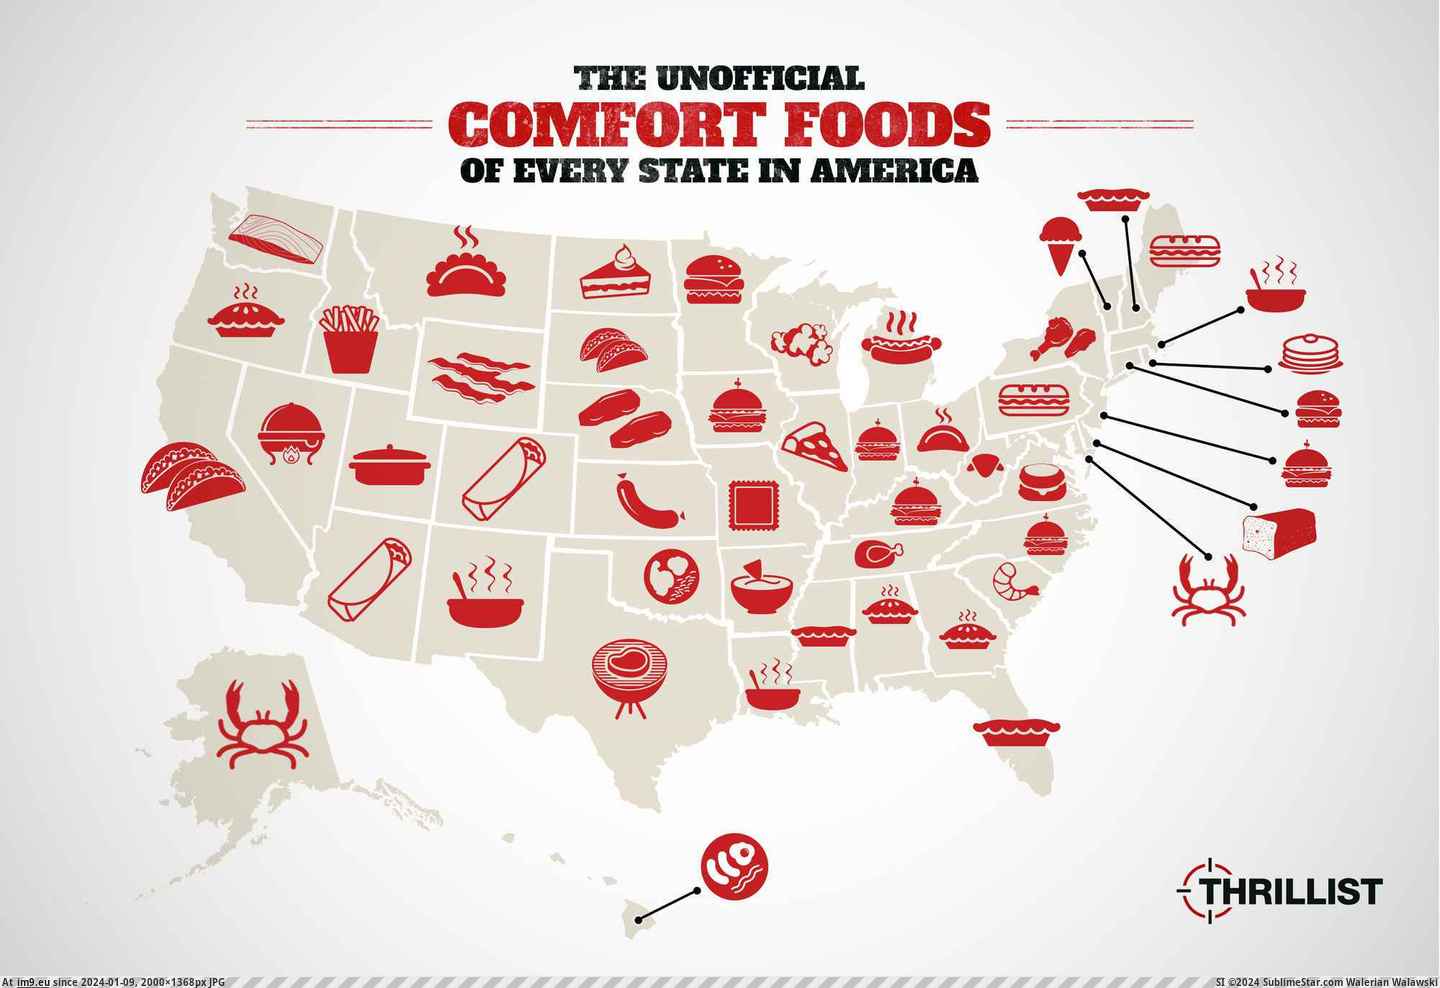 [Mapporn] The Unofficial Comfort Foods of Every State in America [2000x1356] (in My r/MAPS favs)